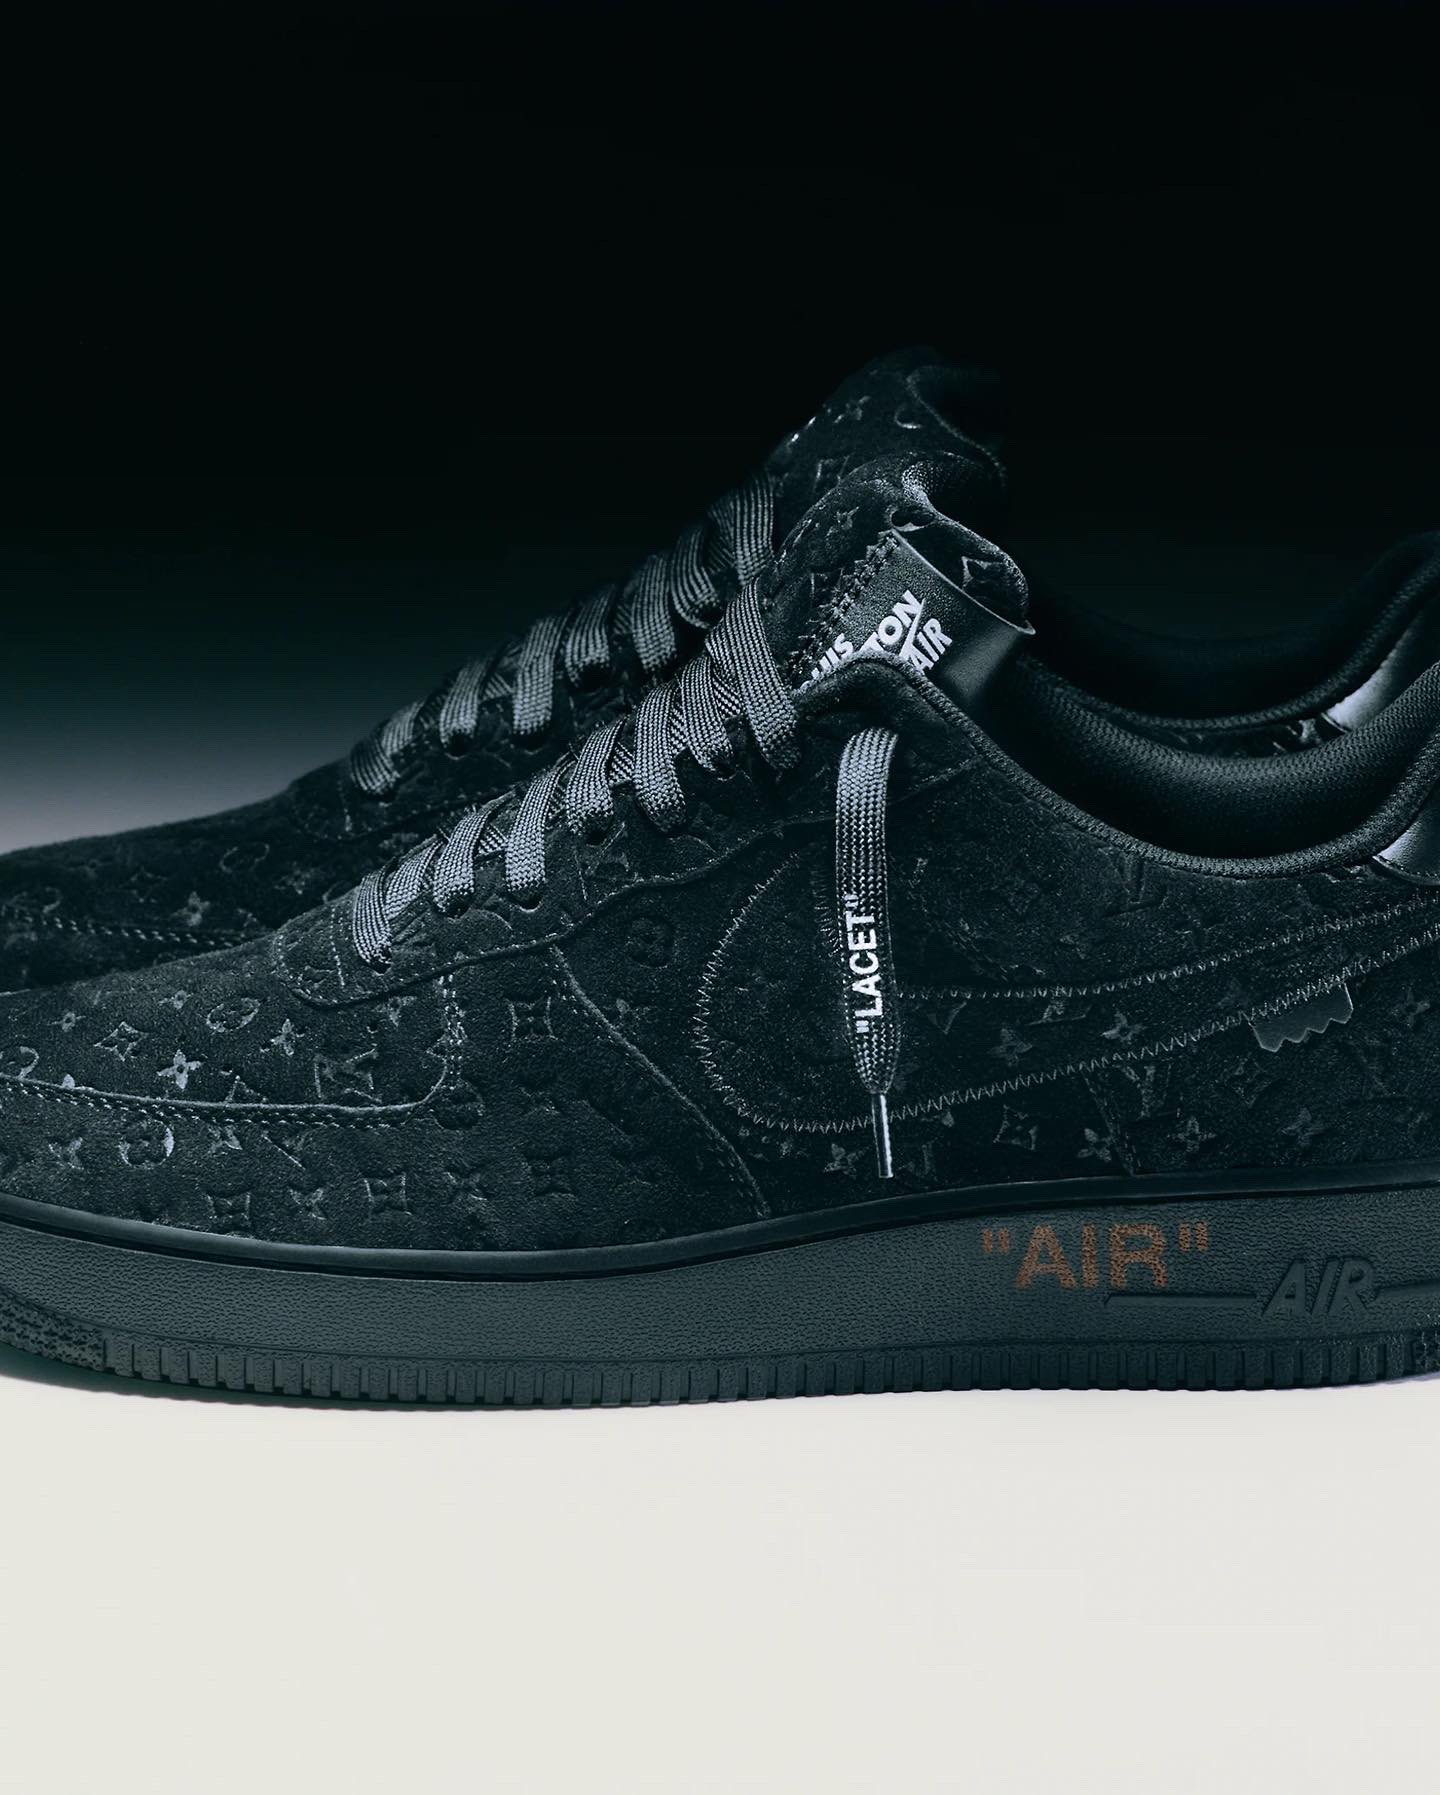 The Louis Vuitton x Nike Air Force 1s Are Coming Soon! - Sneaker